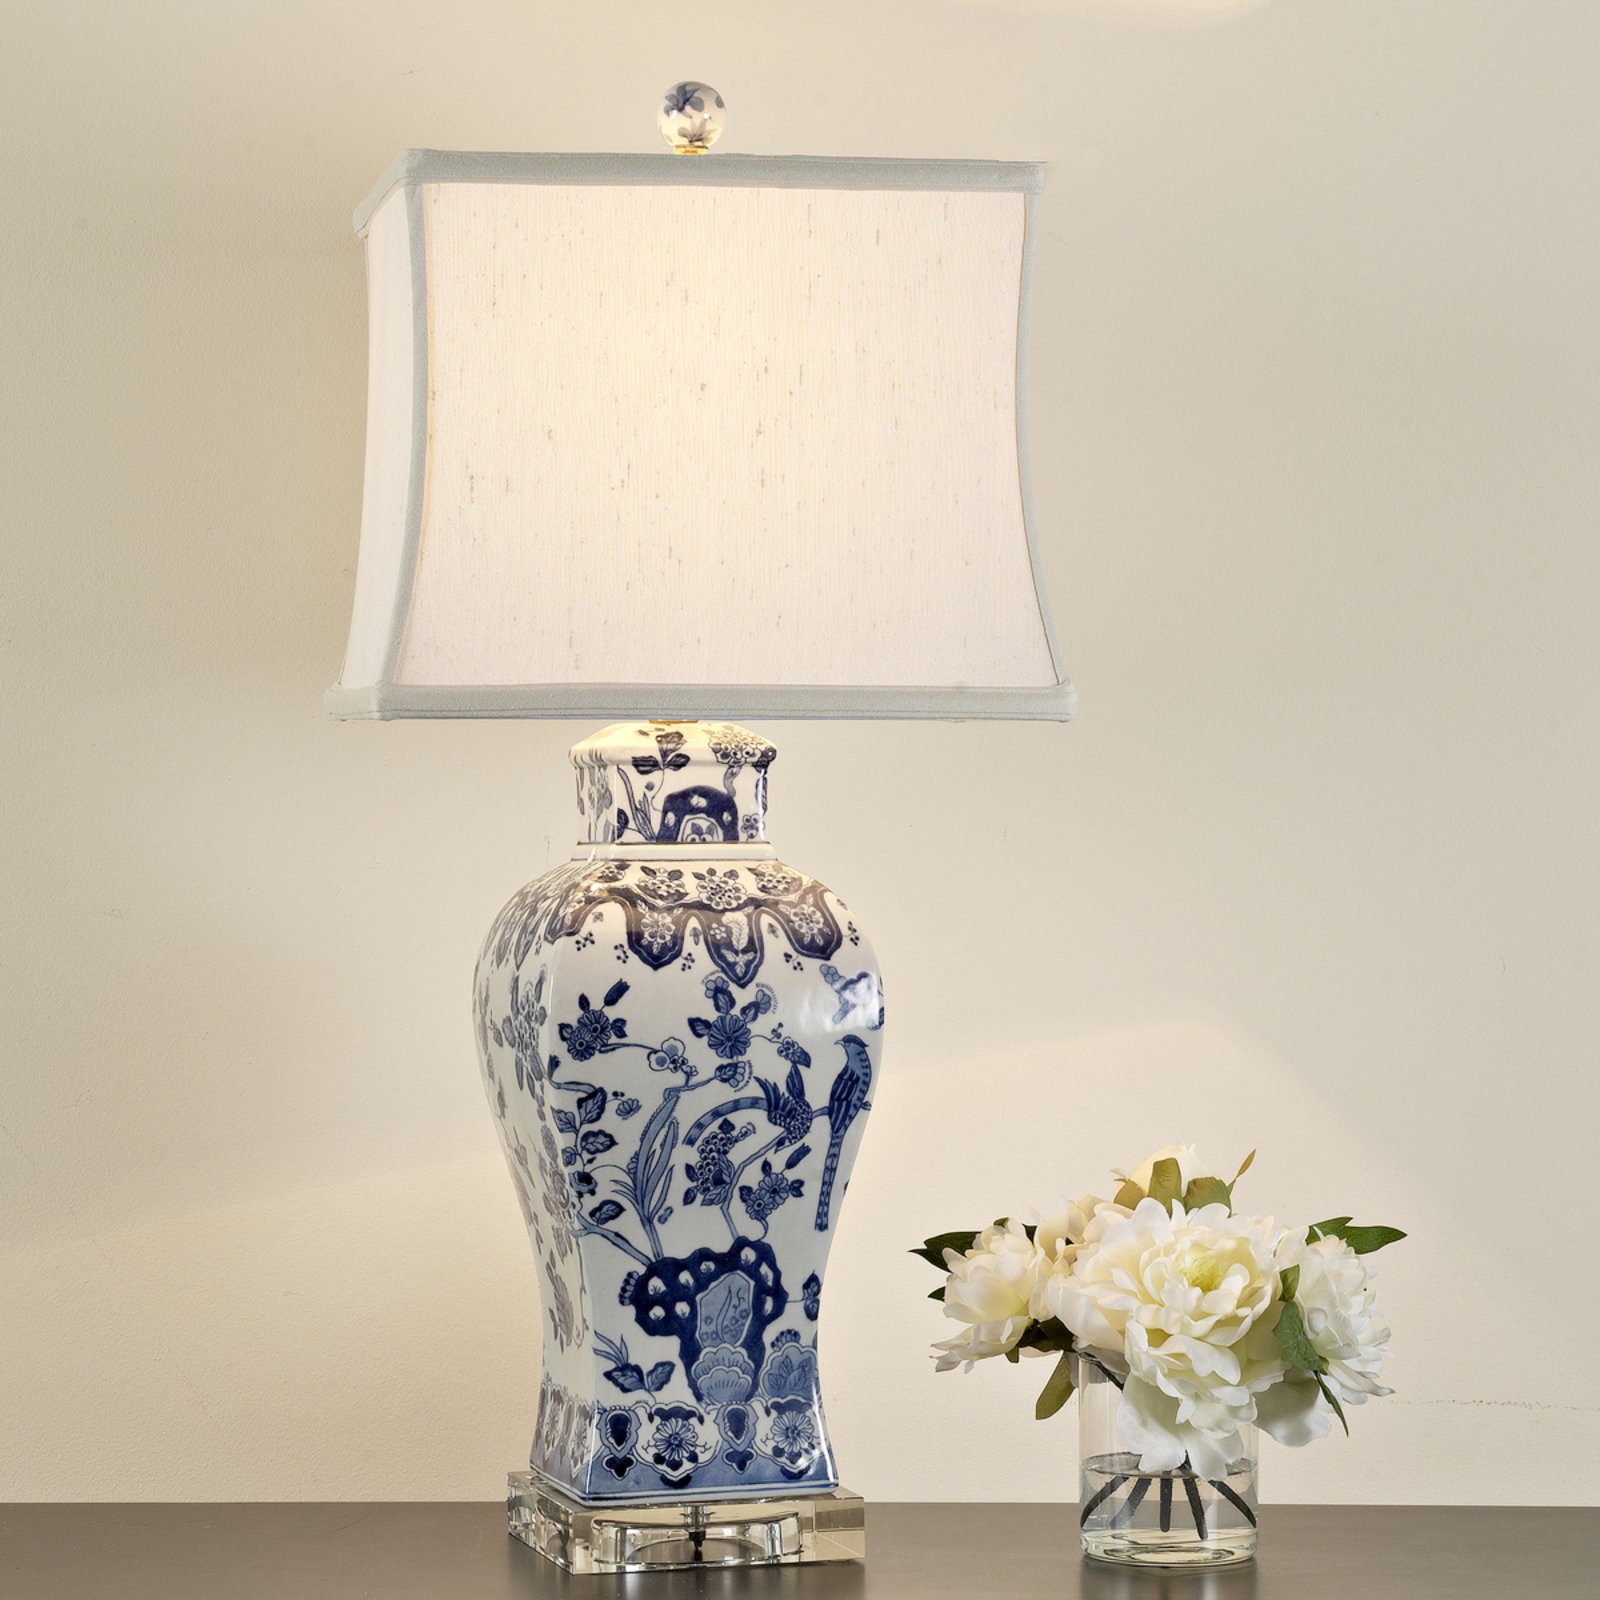 Blue and white porcelain table lamps